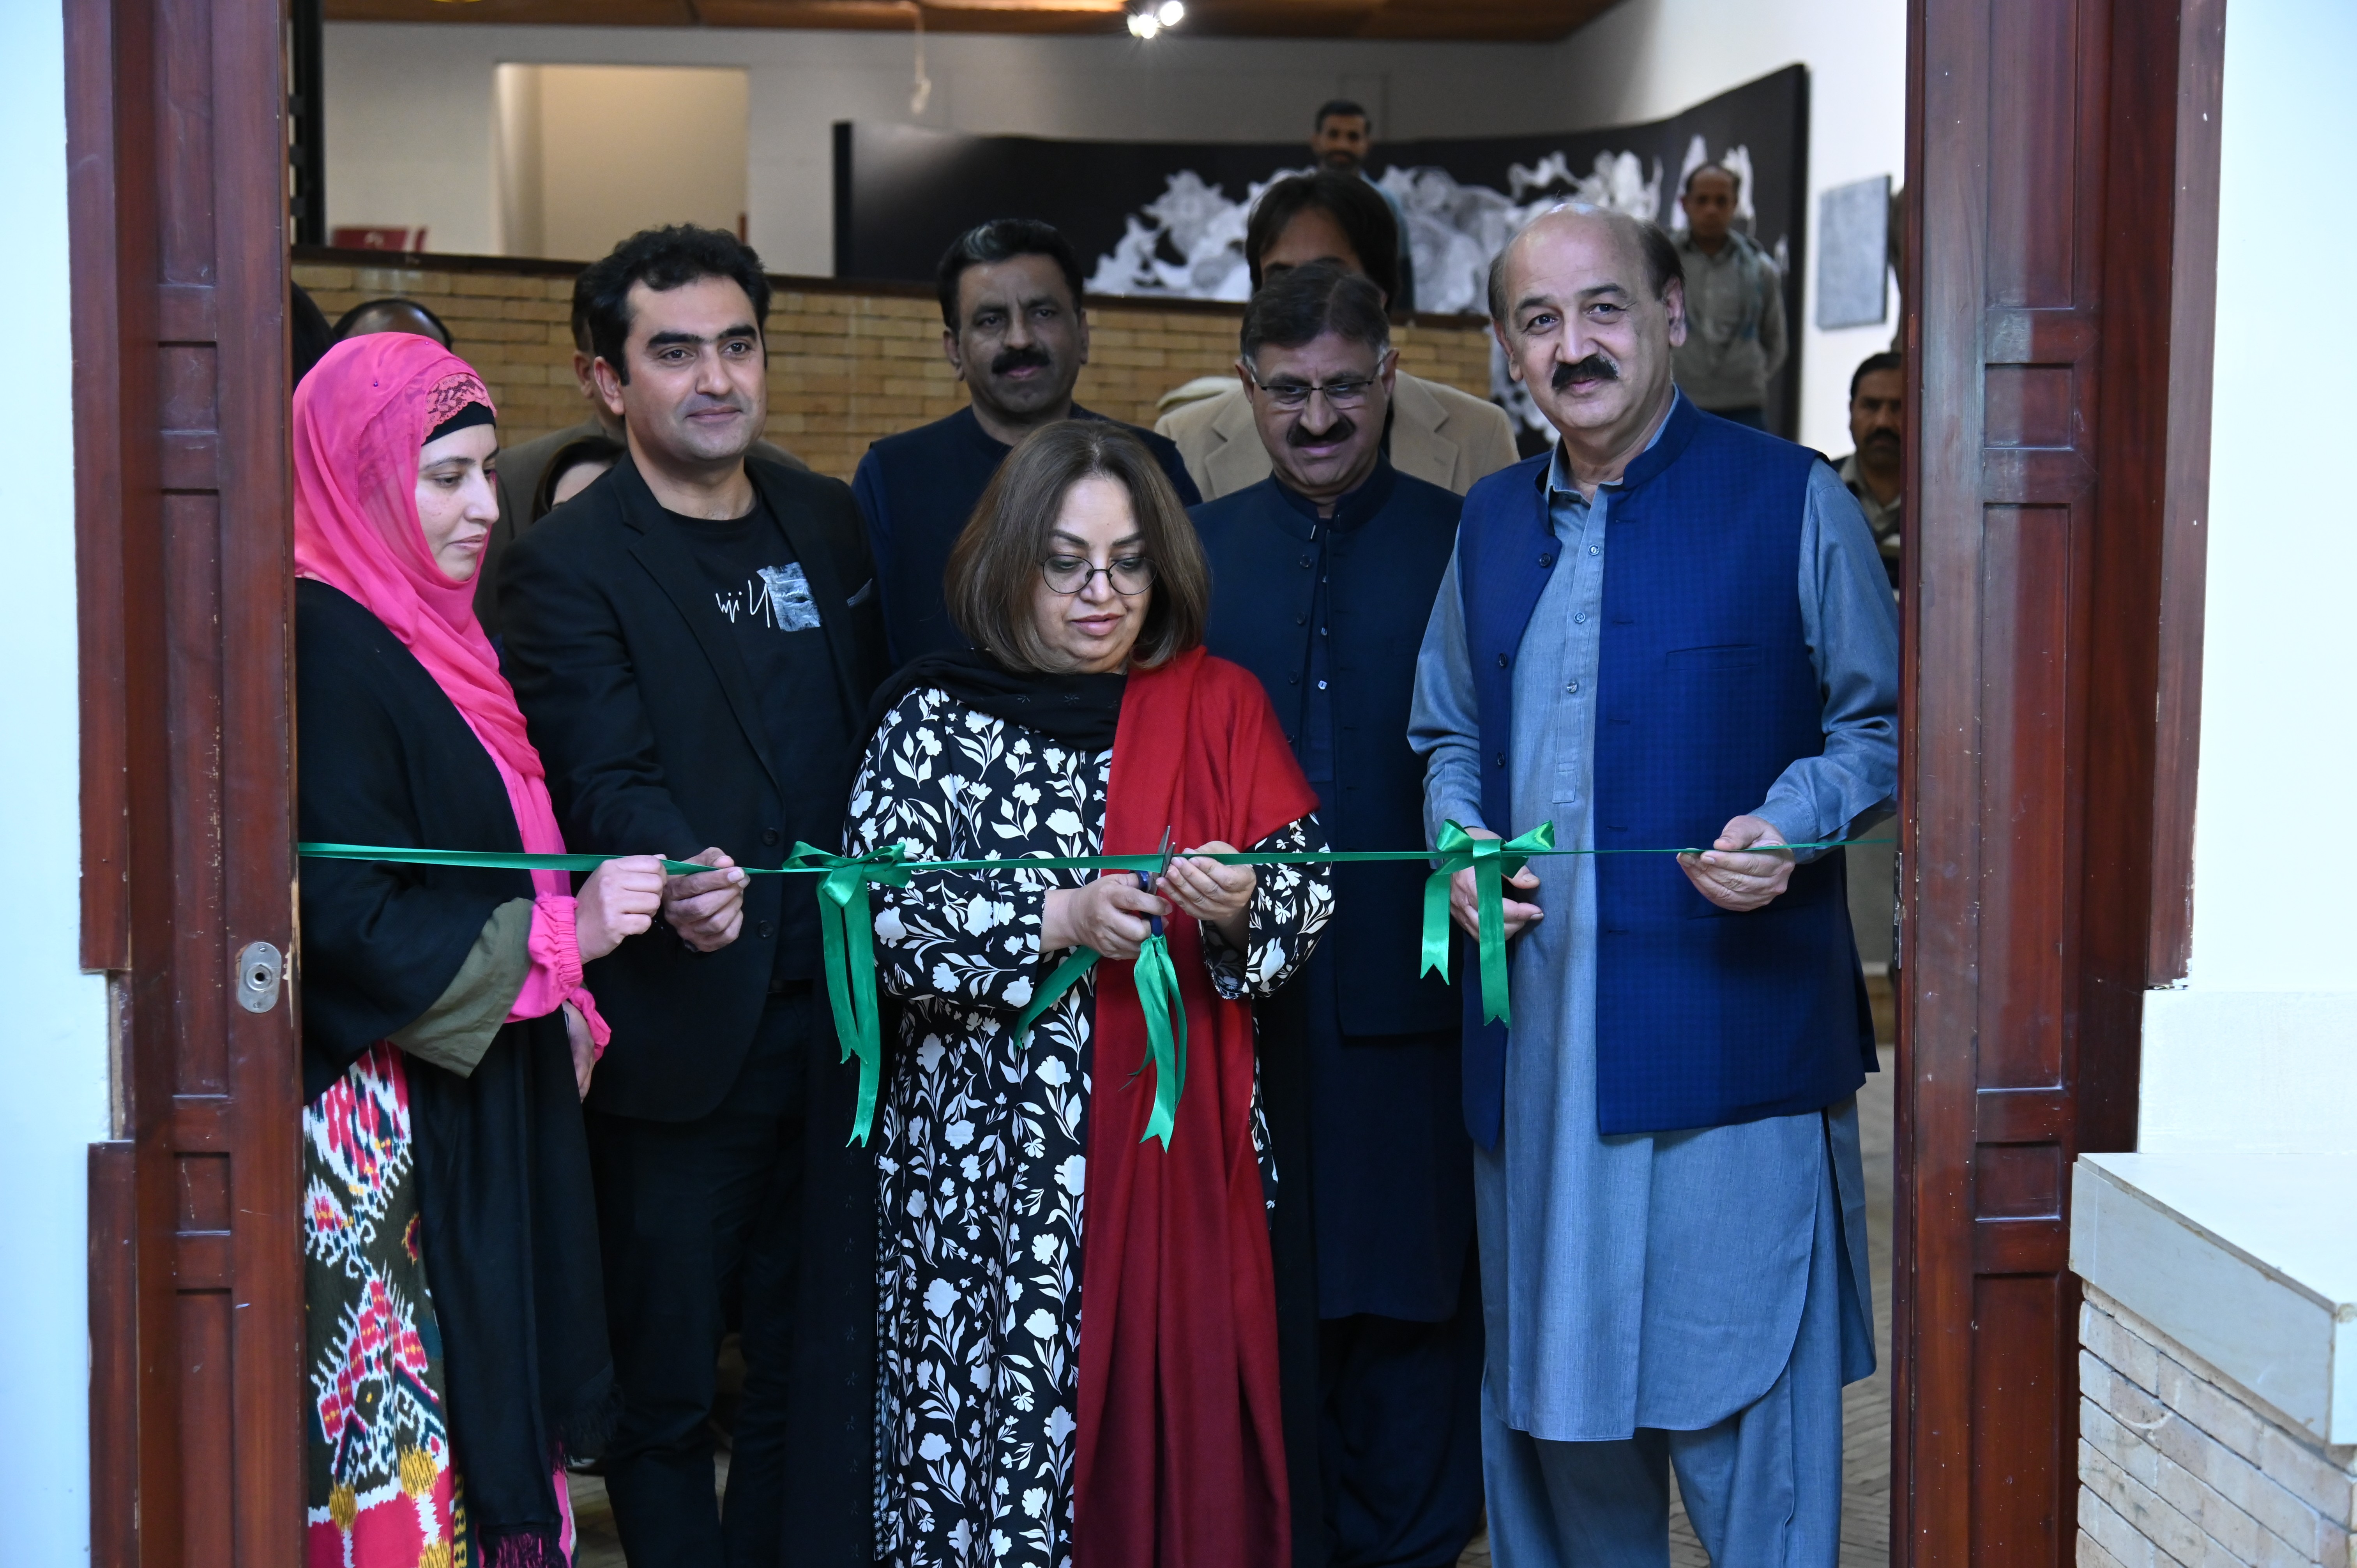 The inauguration of the calligraphy exhibition at PNCA